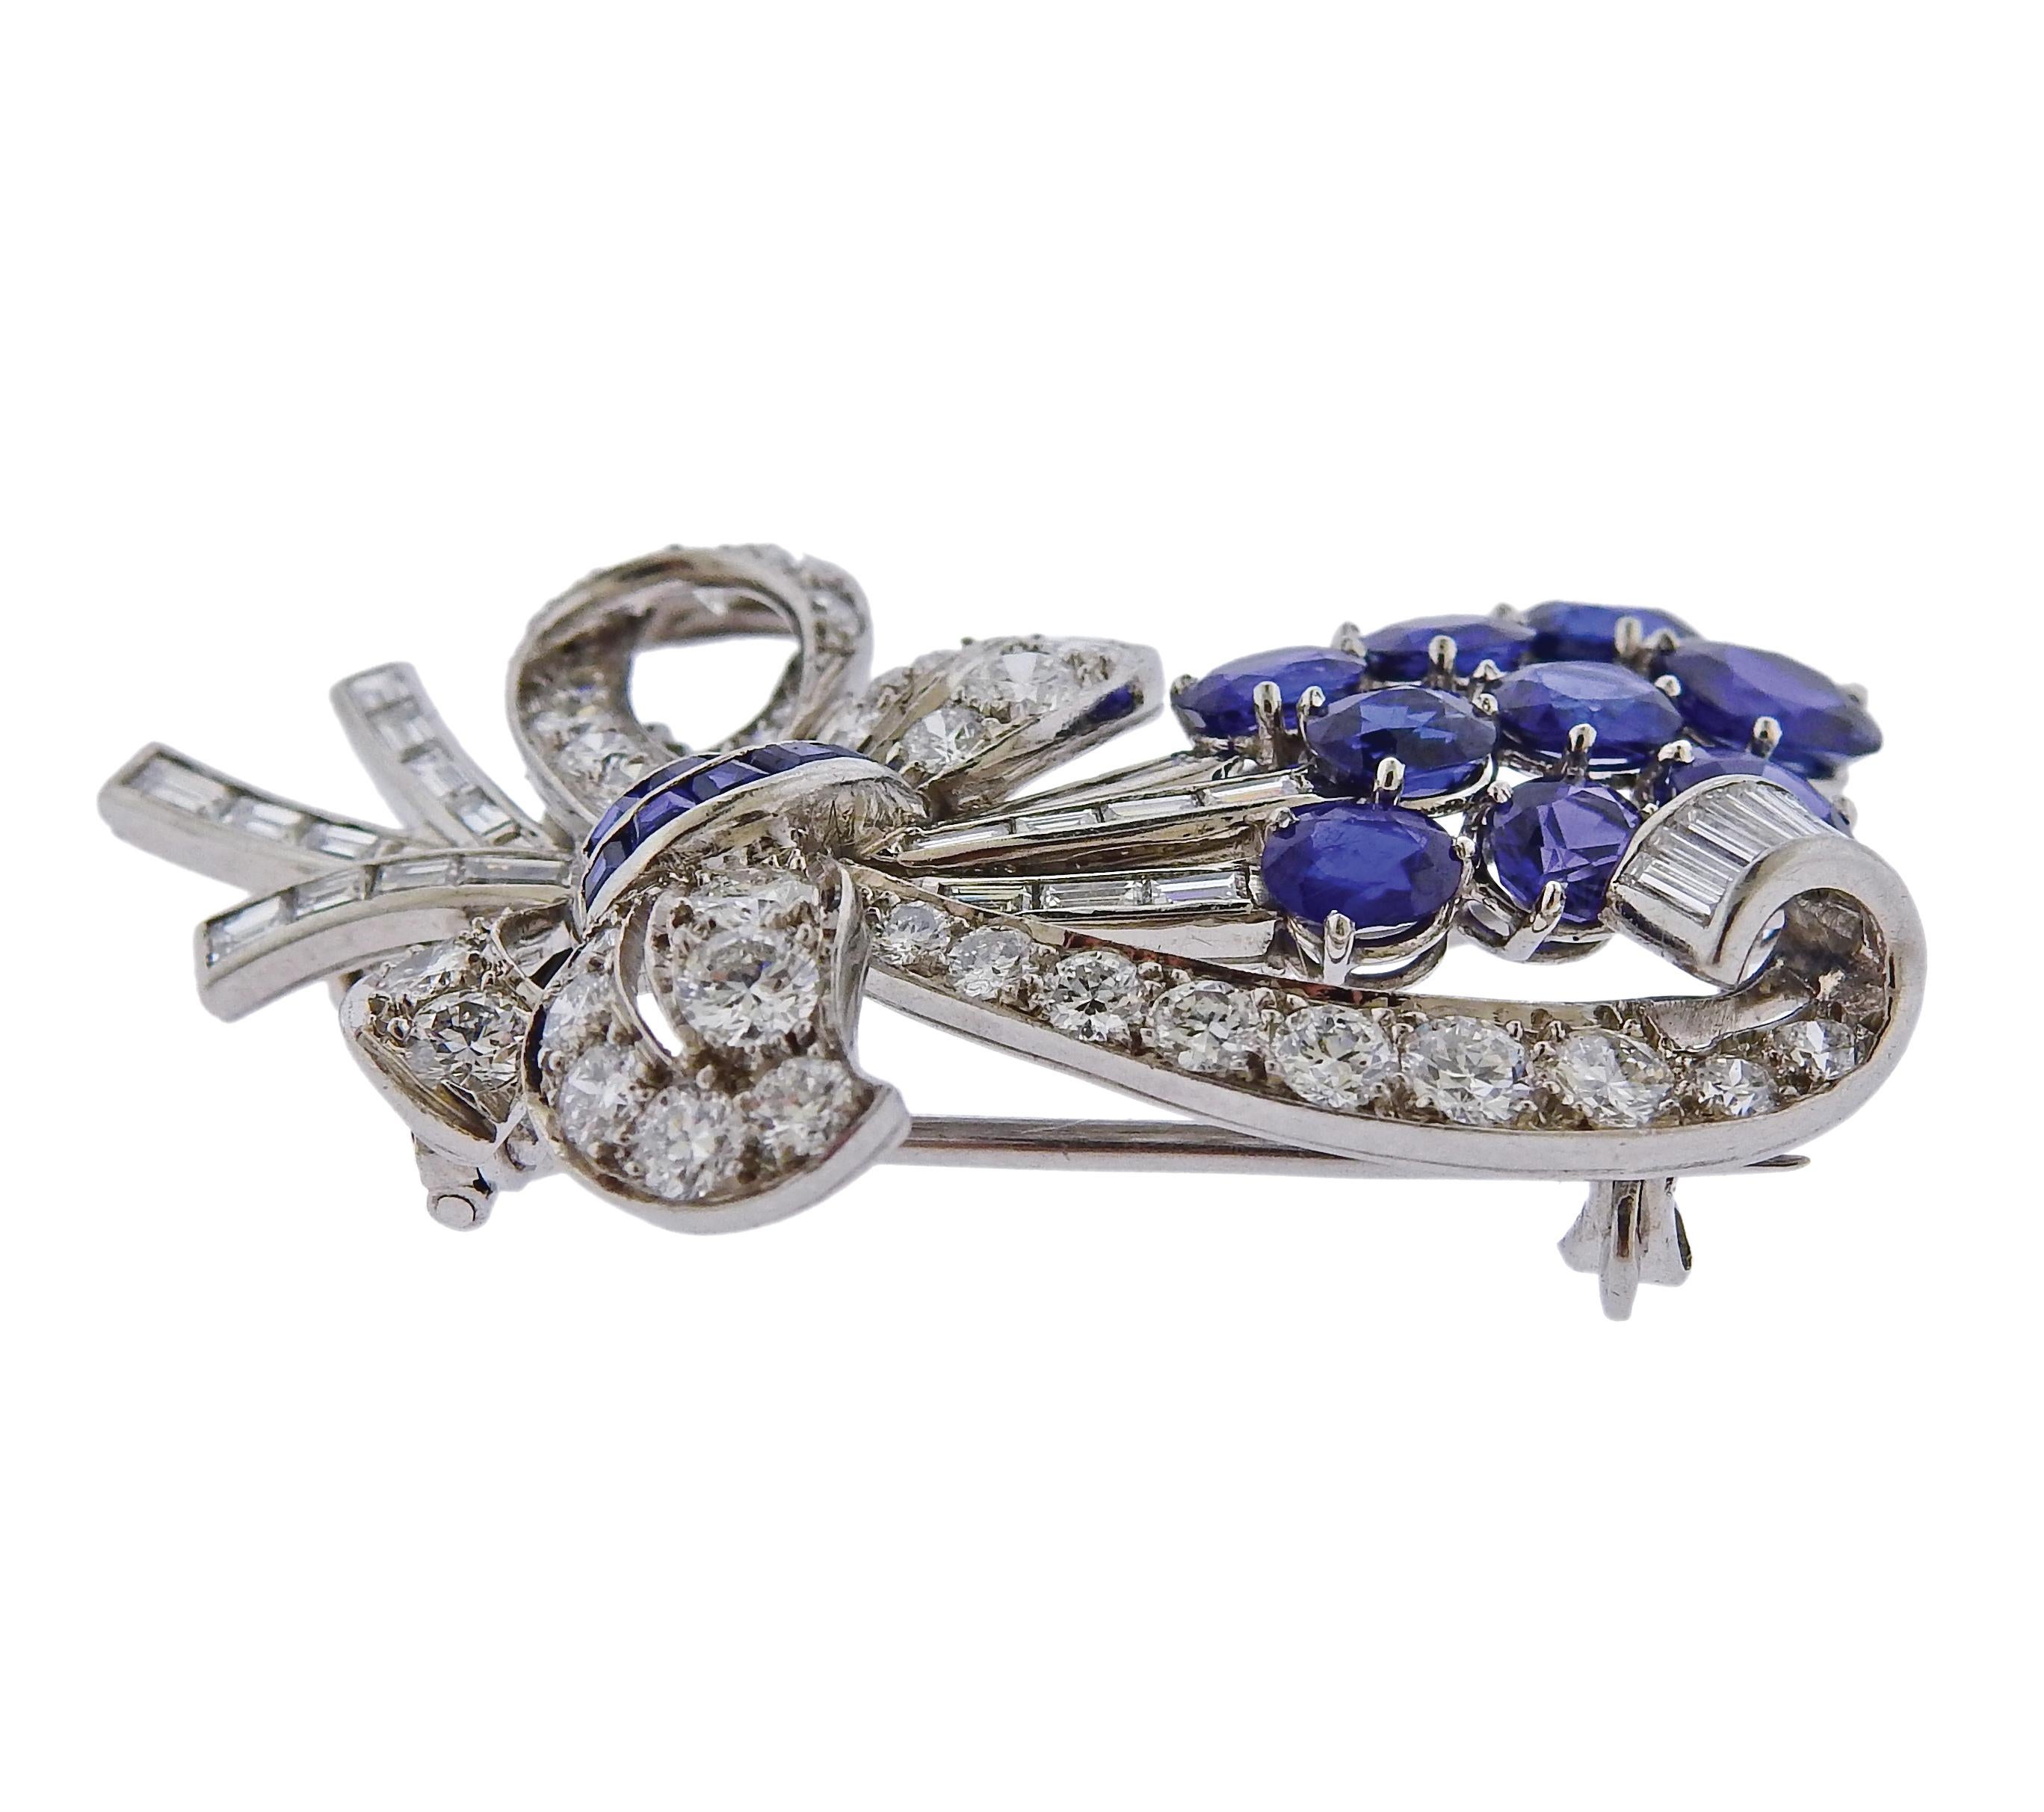 Platinum mid century Tiffany & Co brooch, set with approx. 3.50ctw in blue sapphires and approx.  3.25ctw in diamonds.  Brooch measures 43mm x 29mm. Marked Tiffany & Co Irid. Plat. Weighs 16.9 grams.

SKU#PB-03026